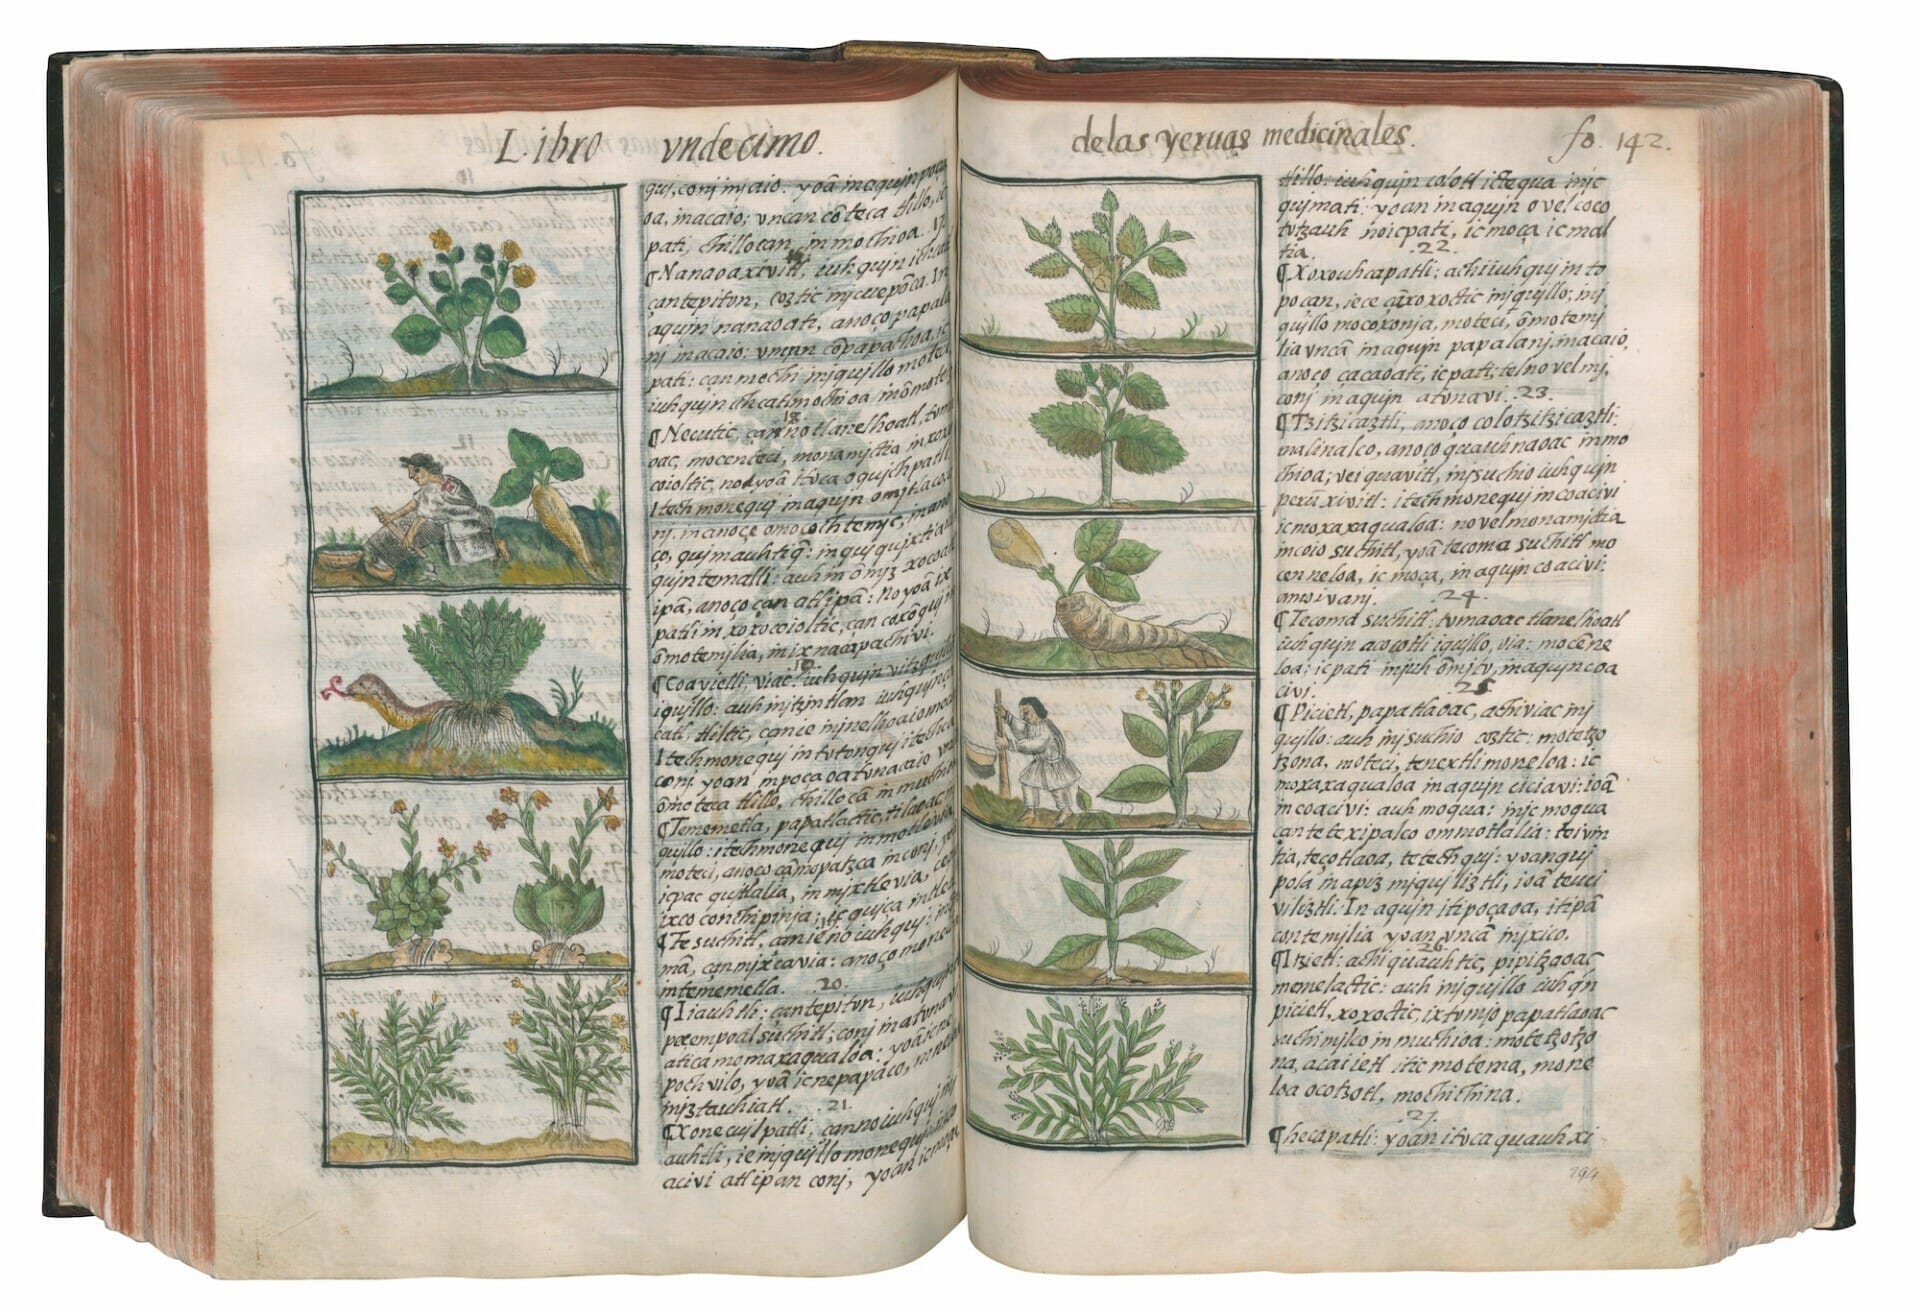 Bernardino de Sahagún, “General History of the Things of New Spain: The Florentine Codex” (1577), ink on paper, each page 12 ¼ × 8 ¼ inches, Biblioteca Medicea Laurenziana, Florence. Image courtesy of Library of Congress, Rare Book and Special Collections Division